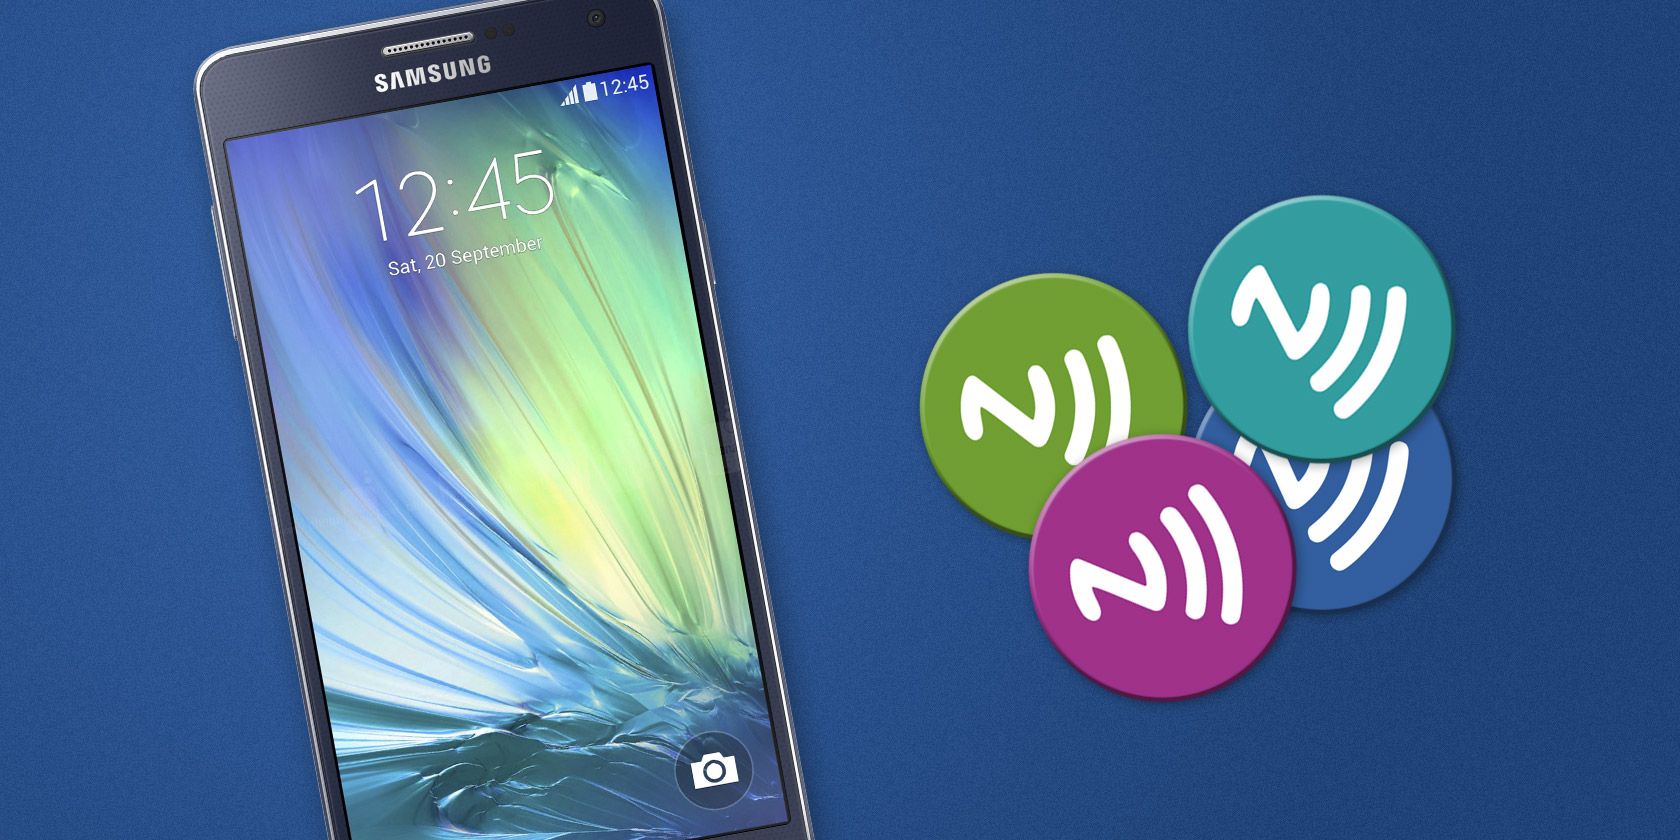 9 Cool Ways to Use NFC That'll Impress Your Friends